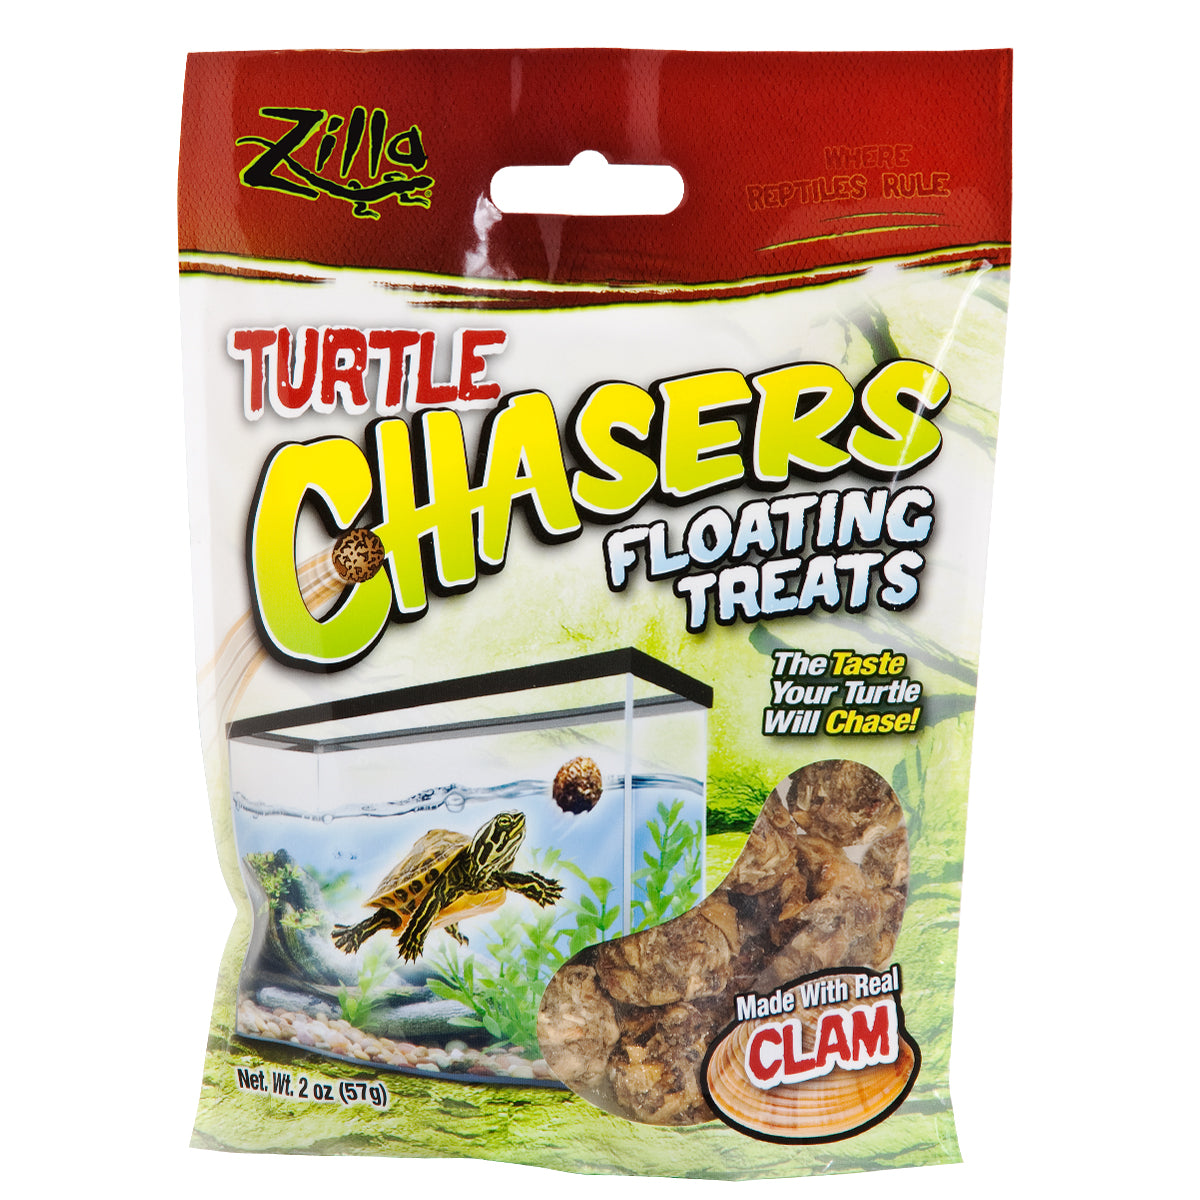 Zilla Turtle Chasers Floating Treats made with Real Clam - 2 oz